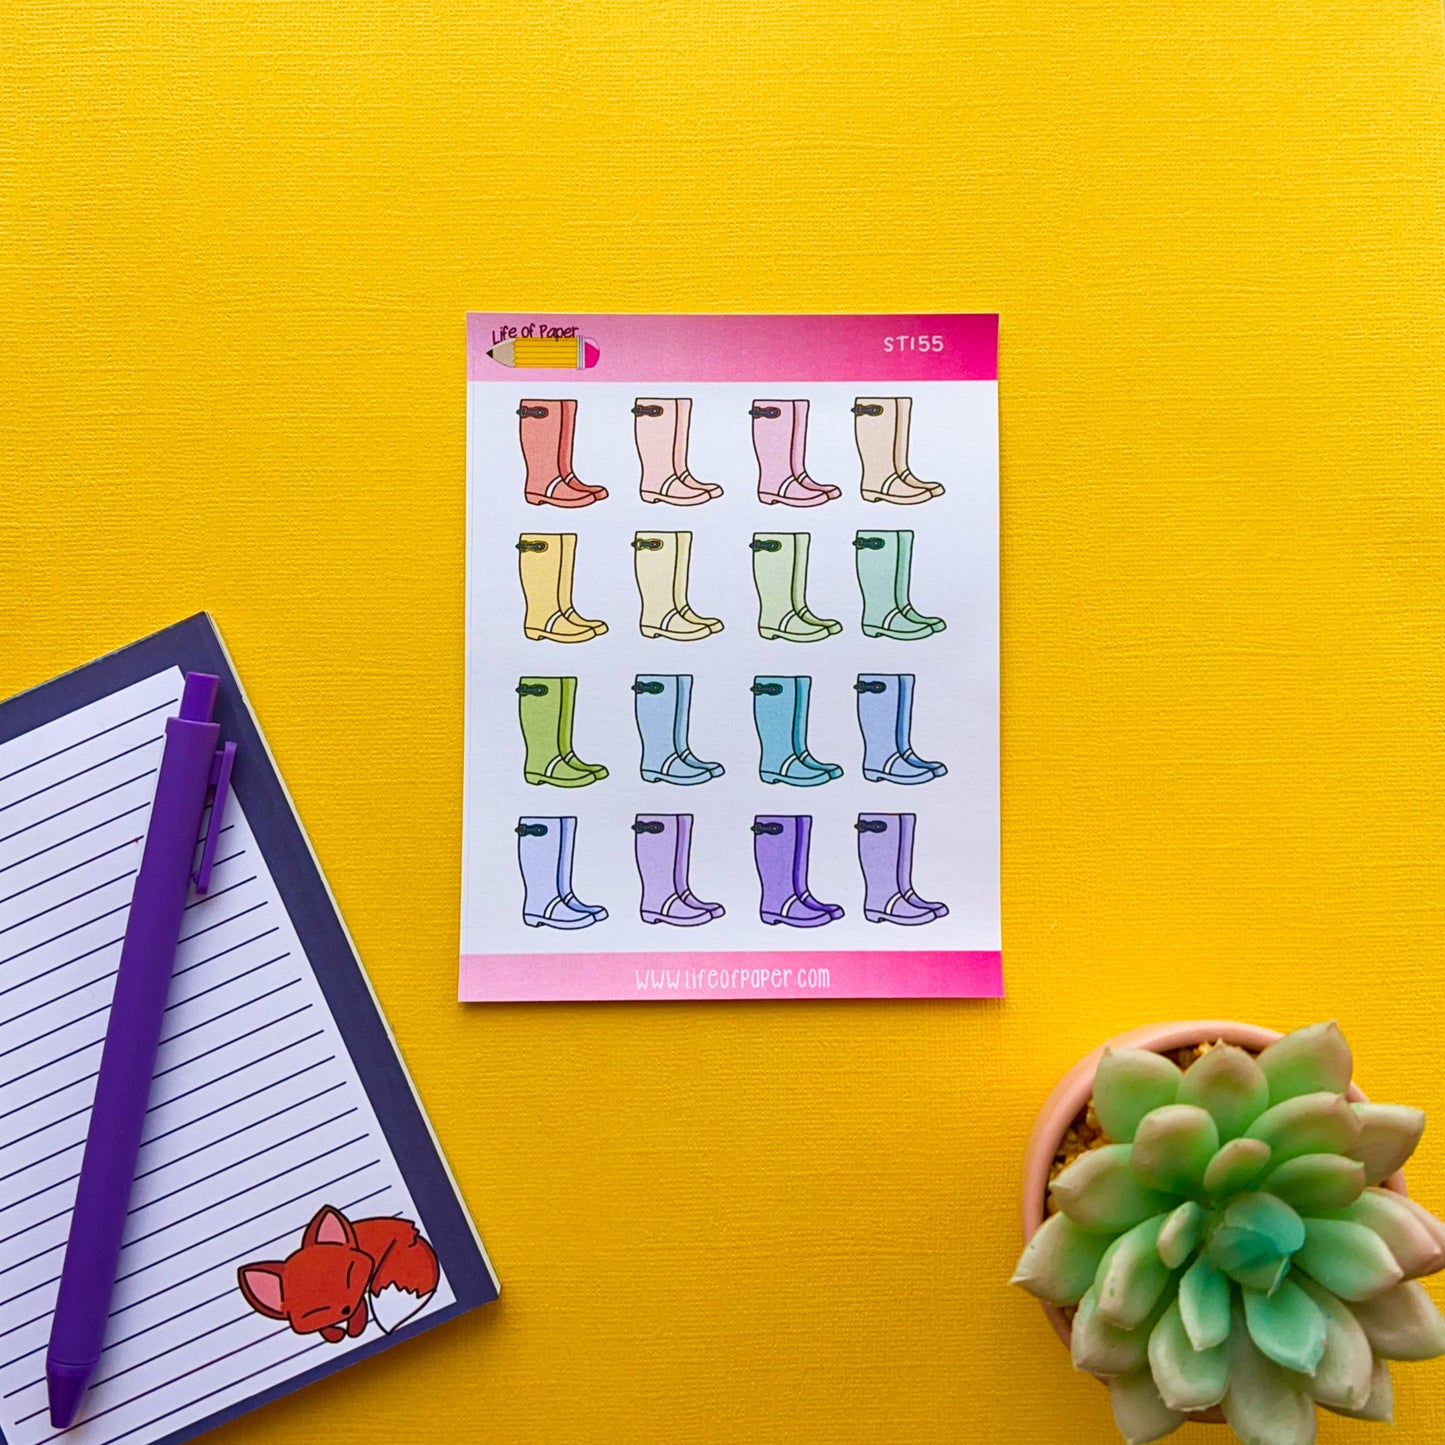 A yellow surface holds a notepad showing colorful Wellington Boot Planner Stickers in rows, with each pair in a different color. To the left is a pen next to a lined notepad with a fox illustration. A small succulent plant is at the bottom right corner.